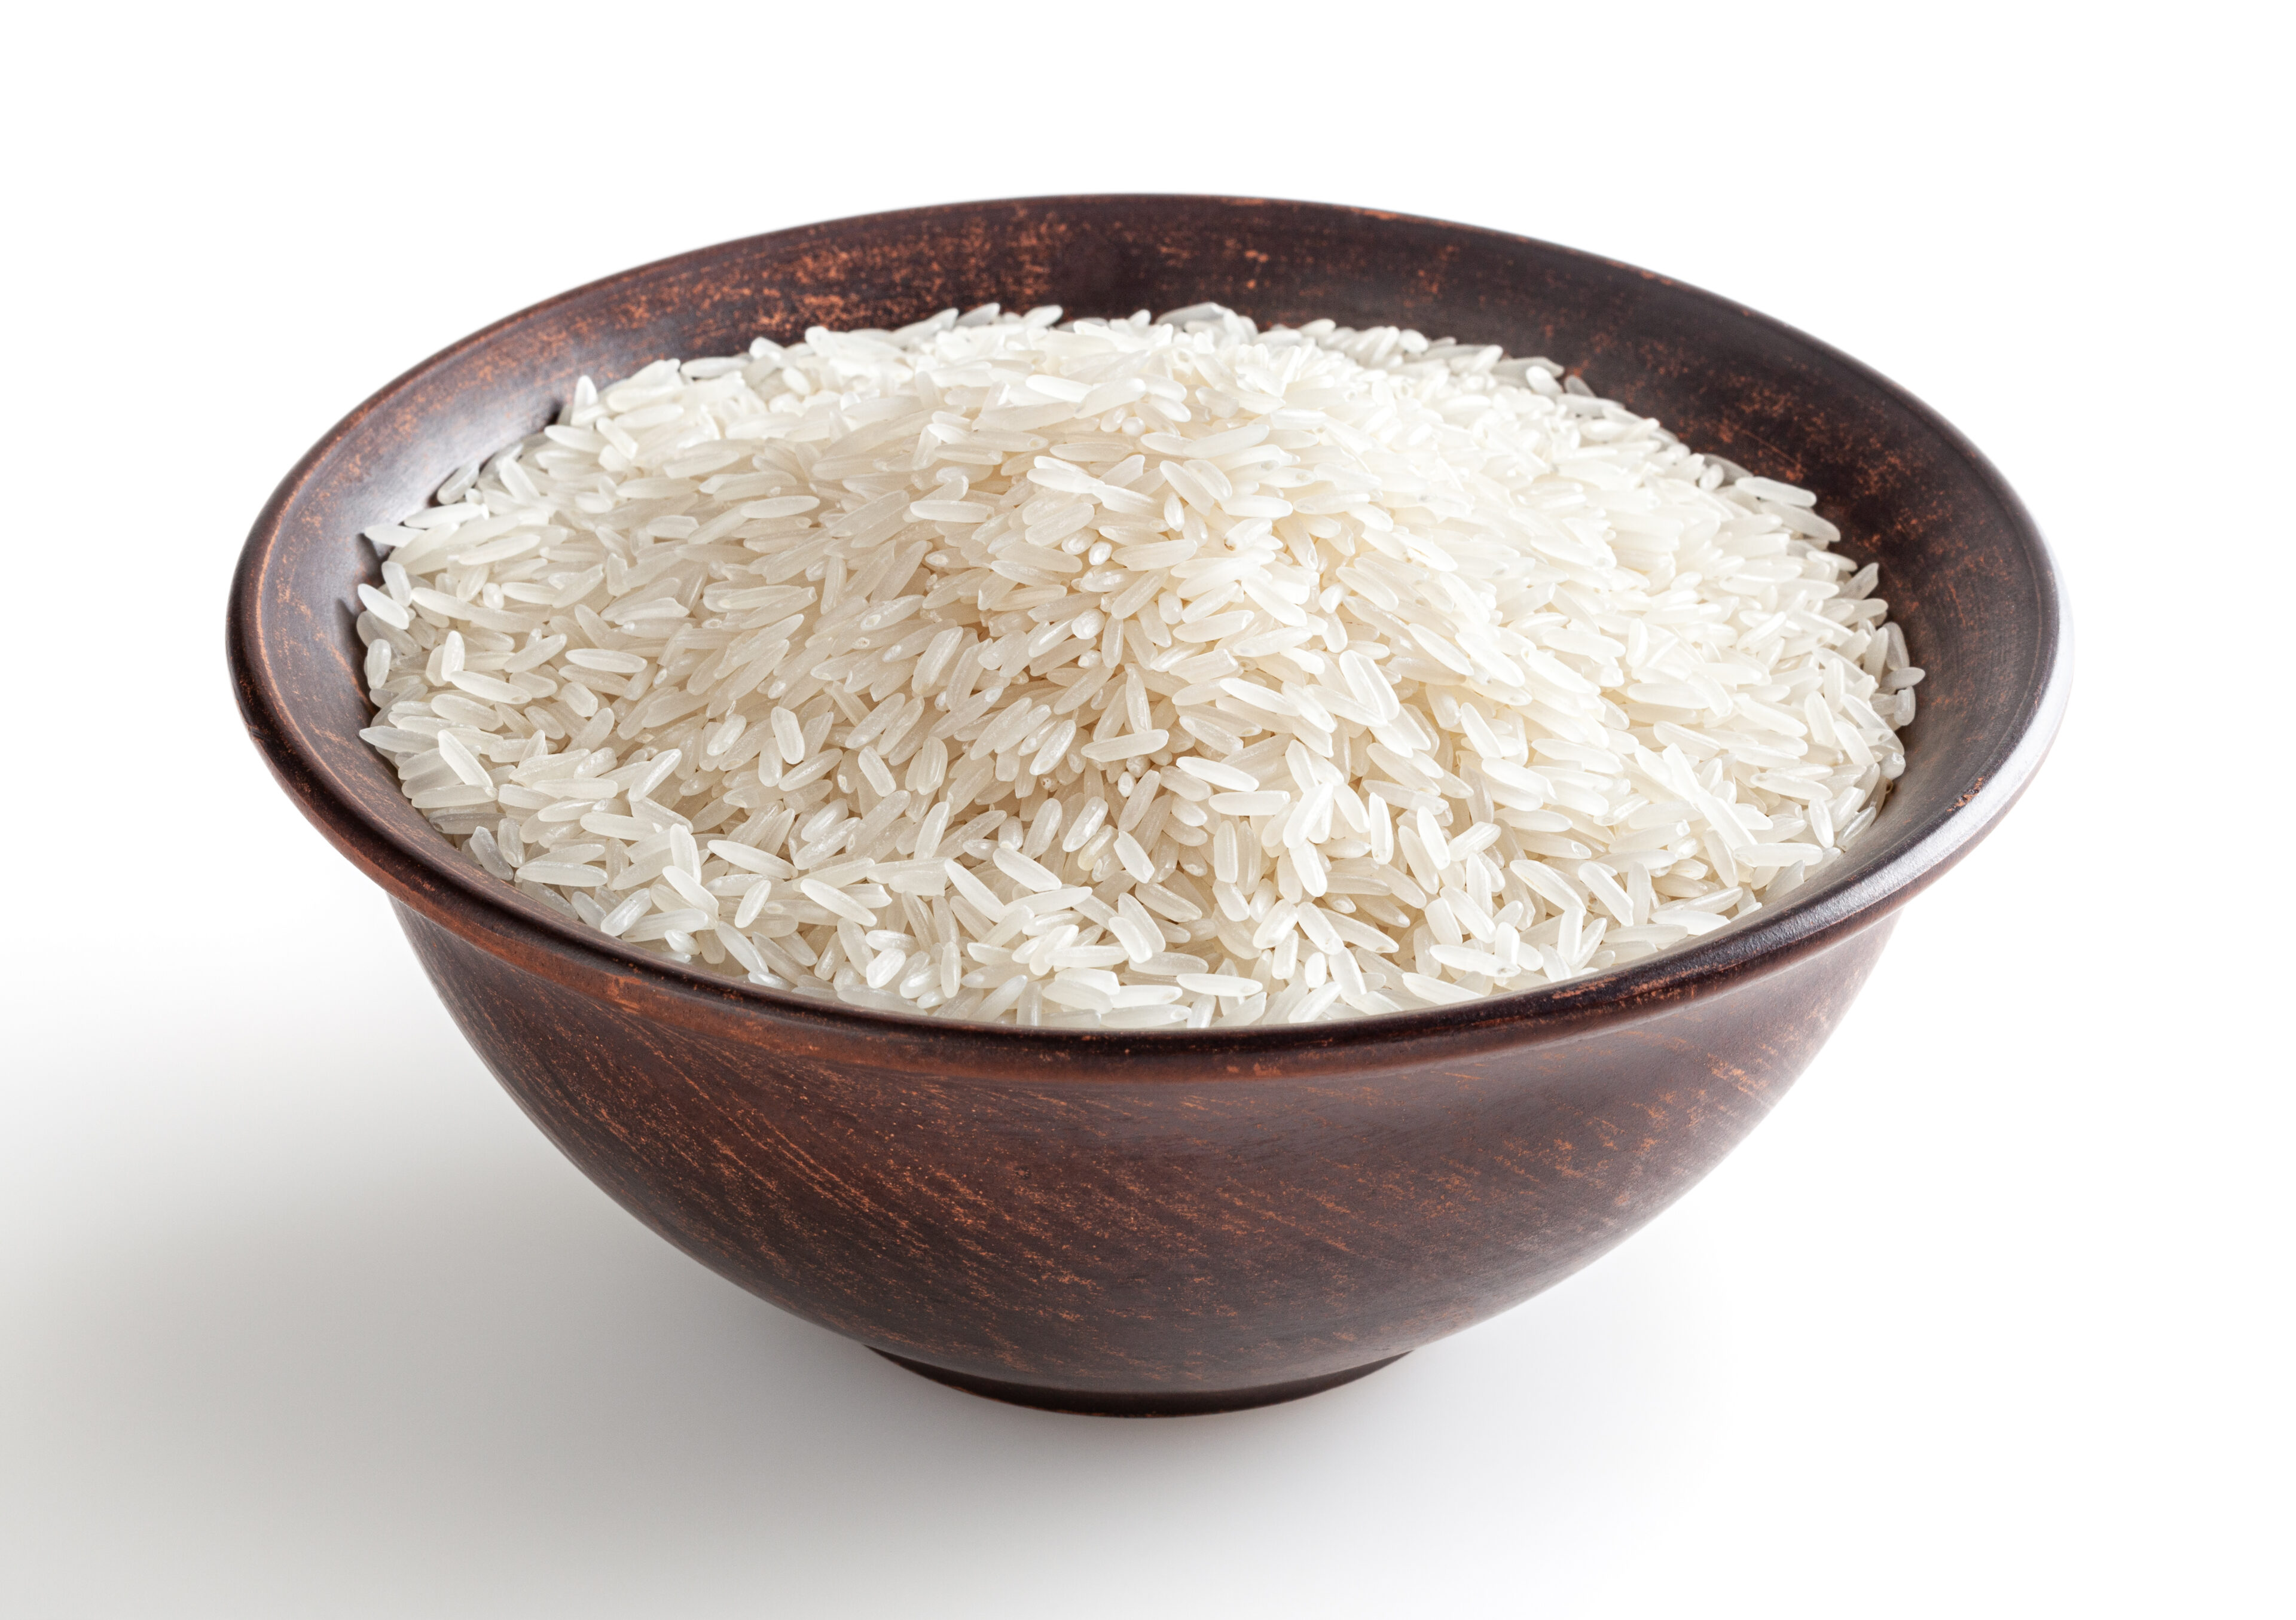 A Cup Of Dry Rice